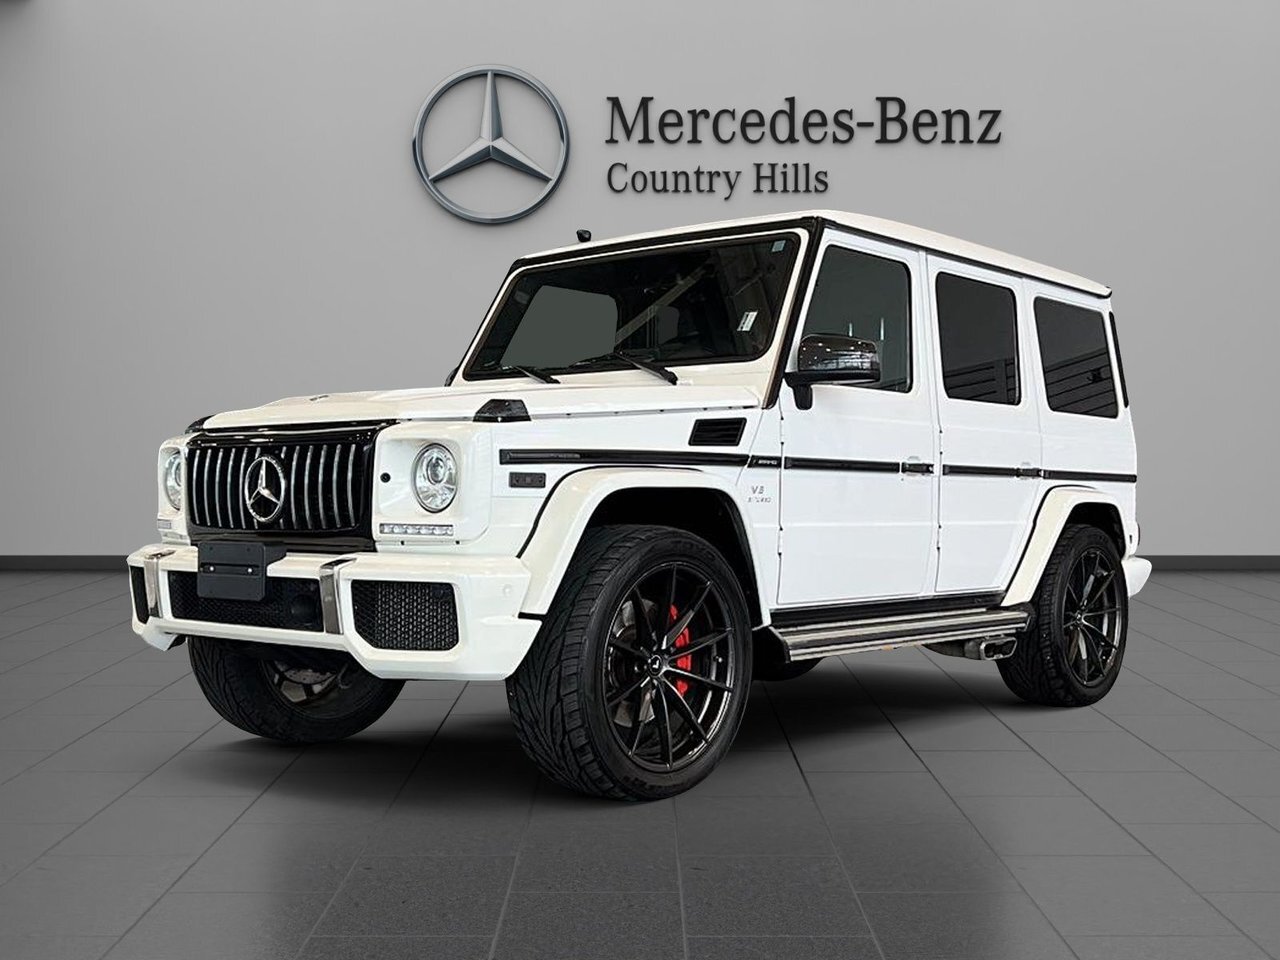 2018 Mercedes-Benz G63 AMG SUV Low km's! No accidents!